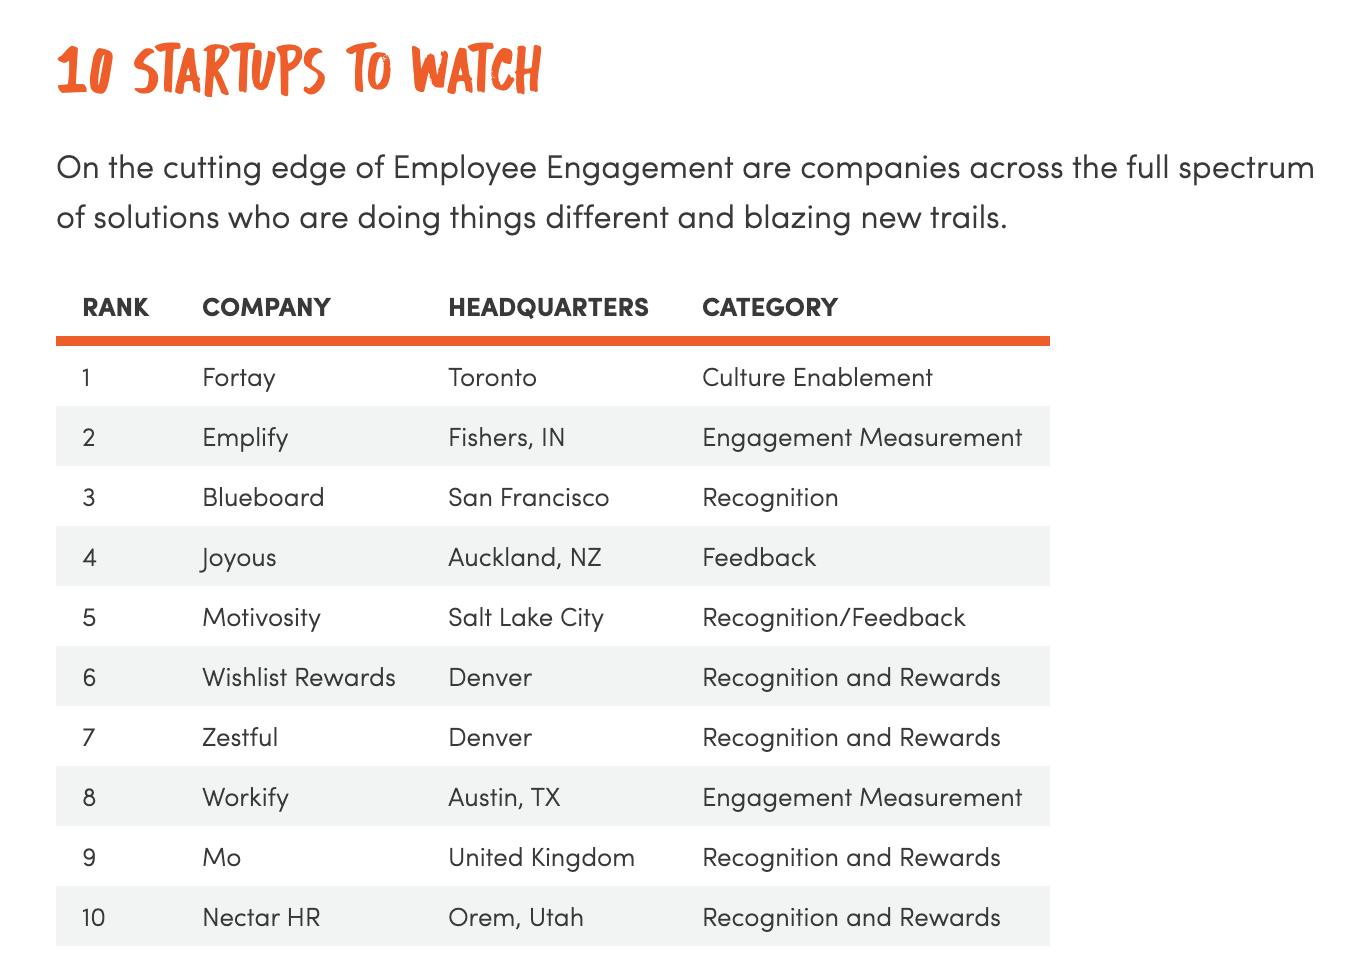 Fortay.ai lists No. 1 in The Starr Conspiracy's 2020 Top Startups to Watch in Employee Engagement